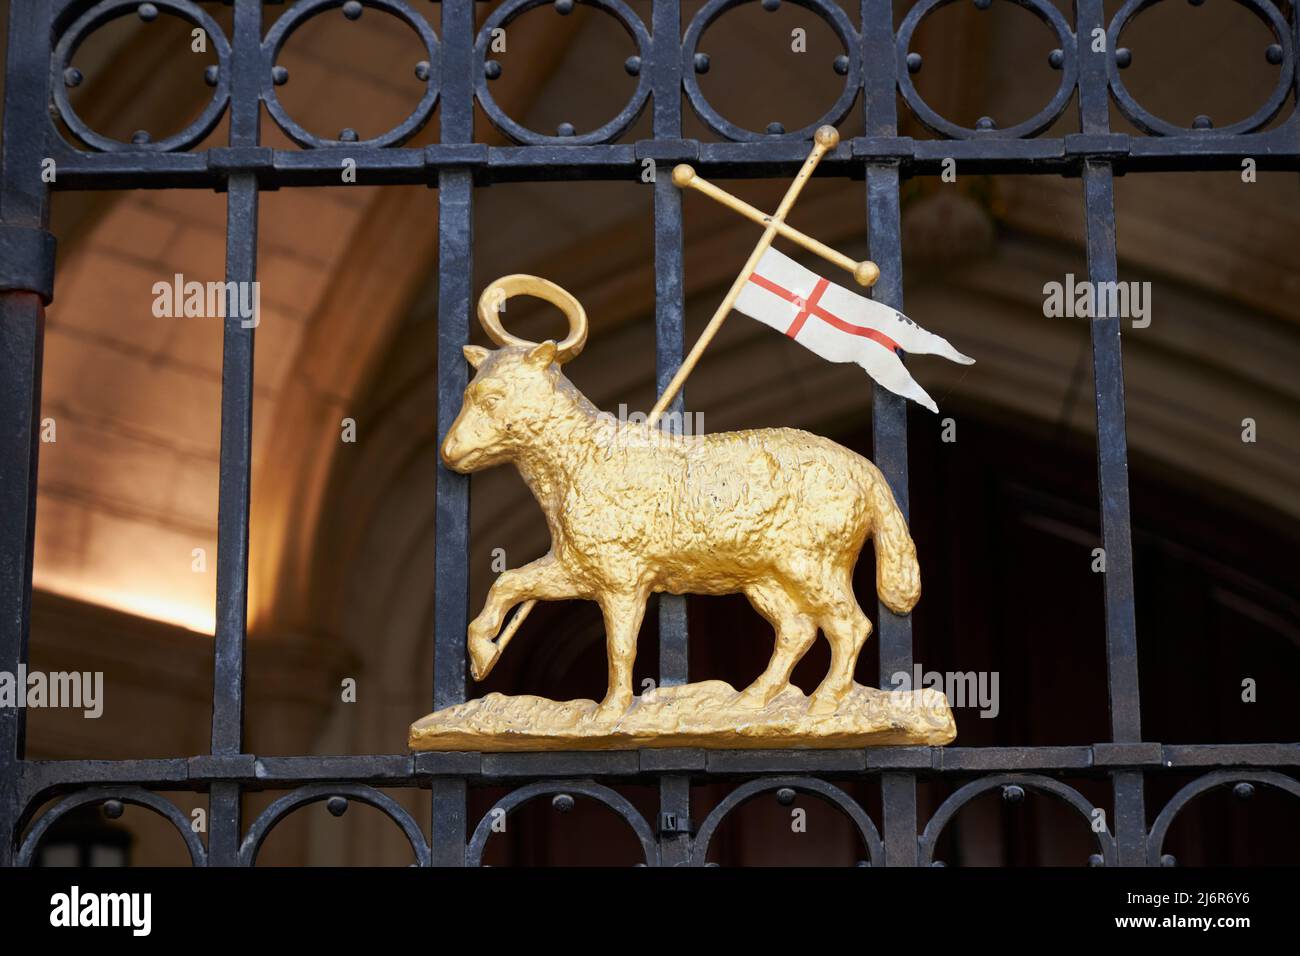 Agnus dei, Lamb and Cross and St. George's cross flag symbol, Temple, the City of London. Stock Photo